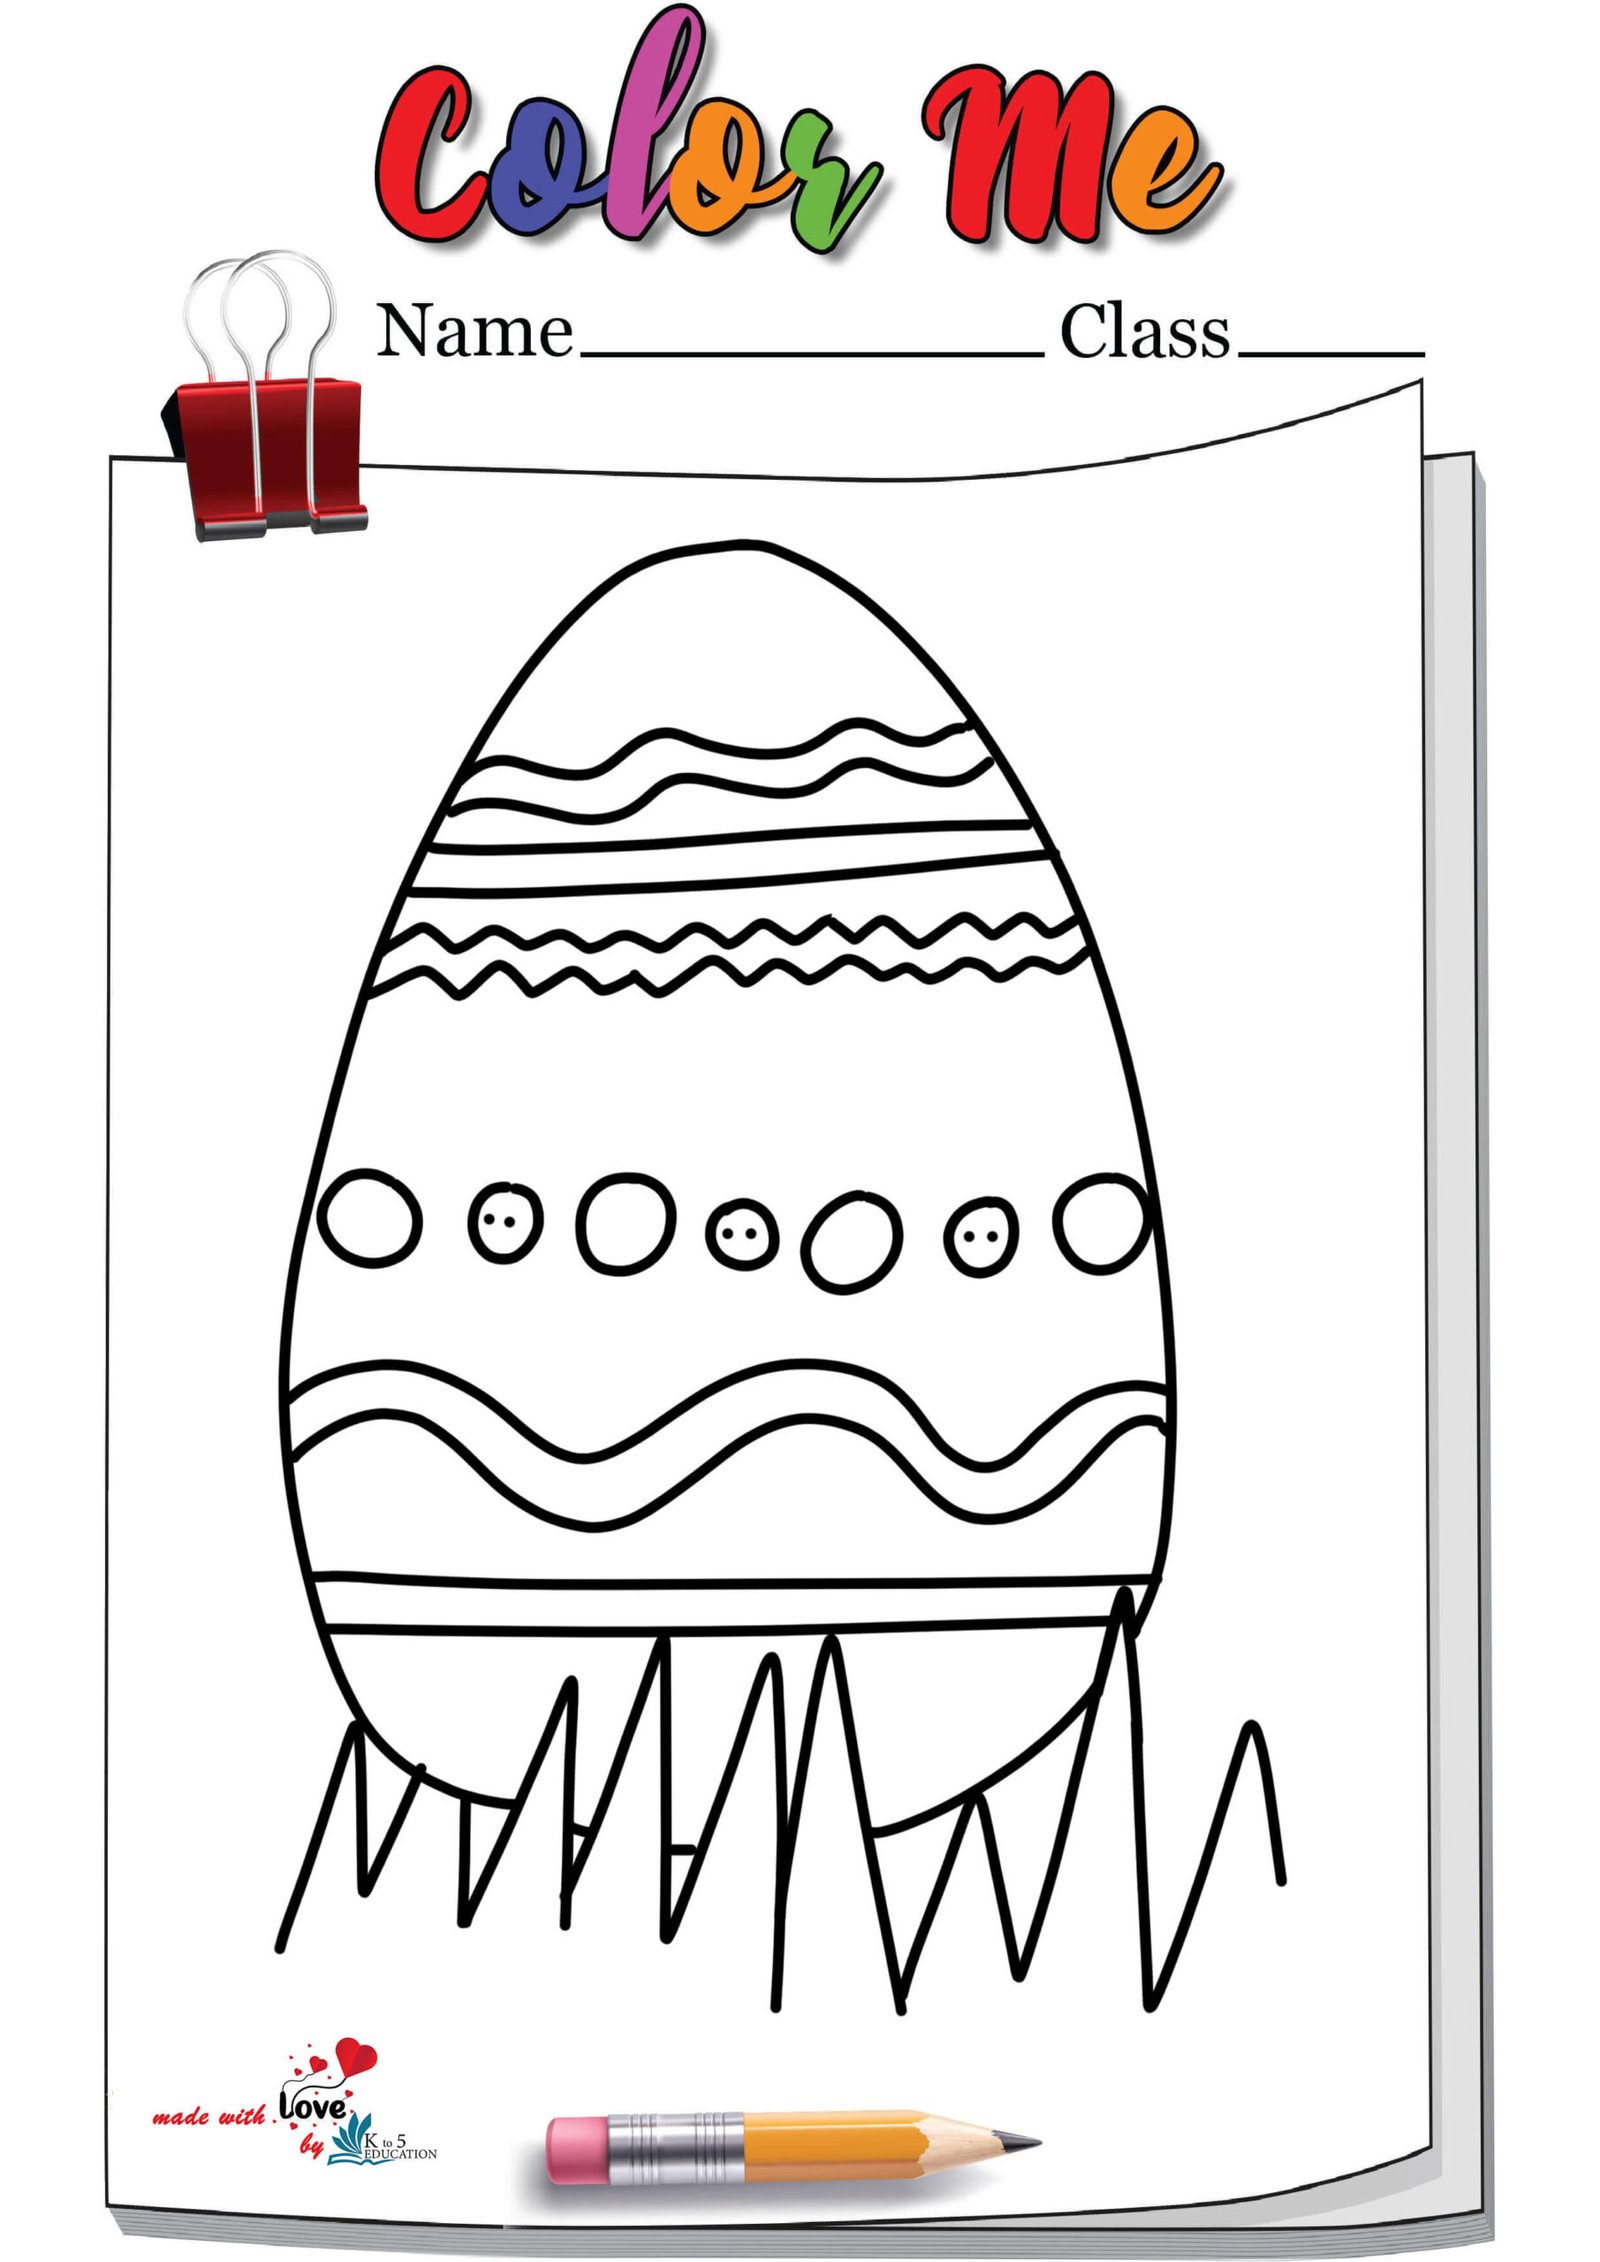 Paper Easter Egg Coloring Page